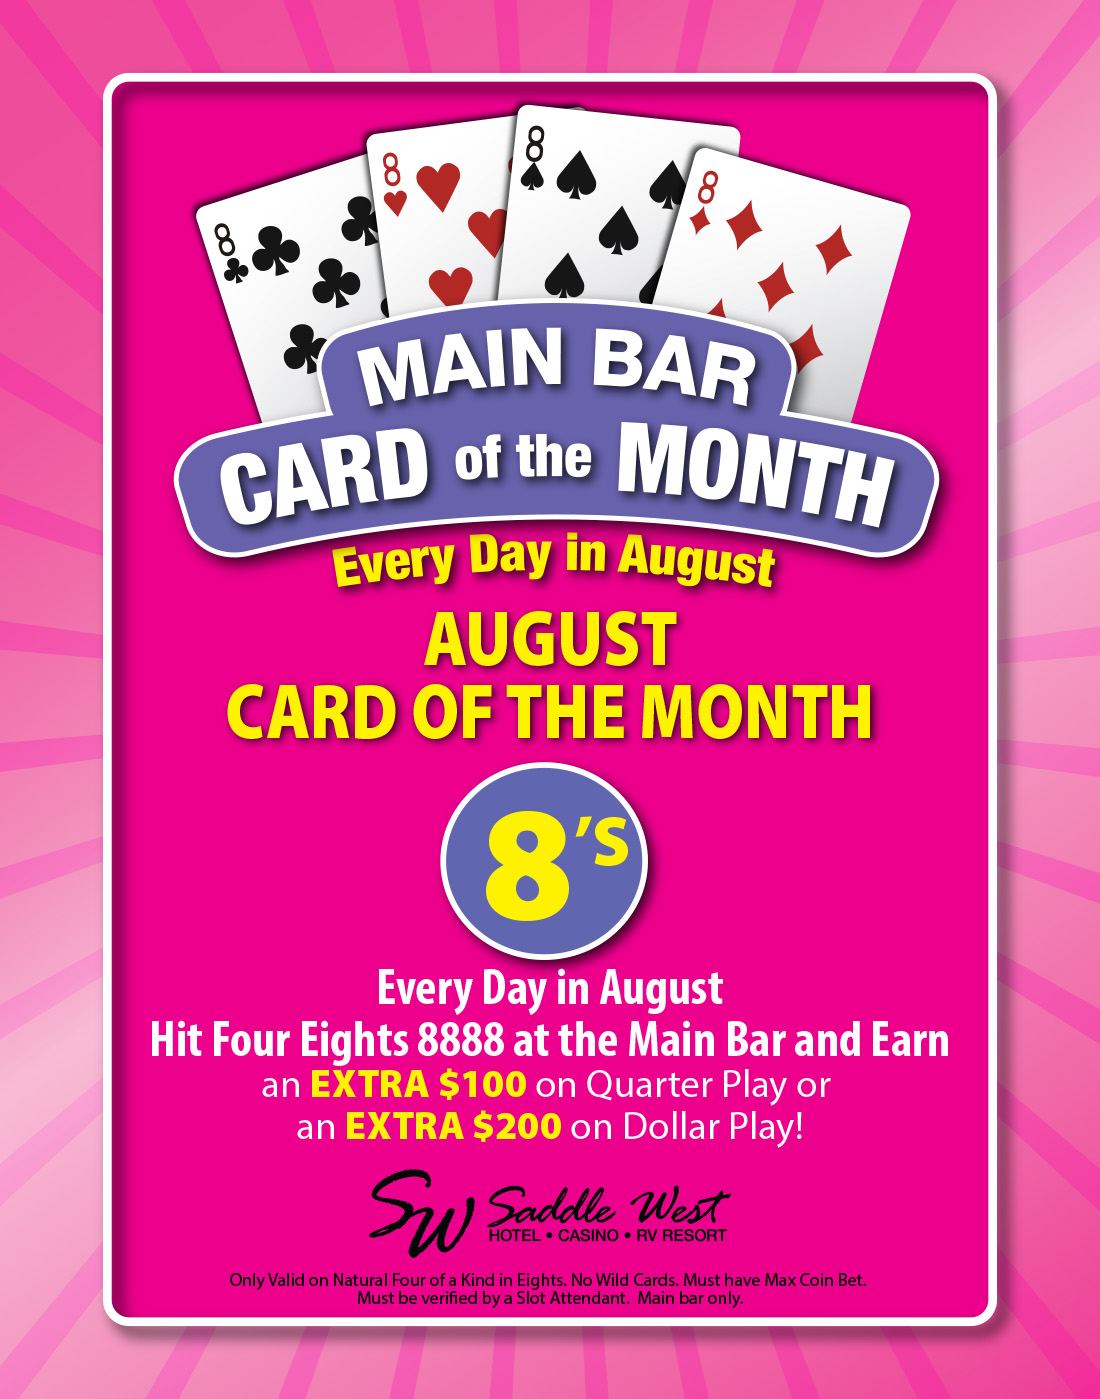 Card of the Month 22x28 - PROOF